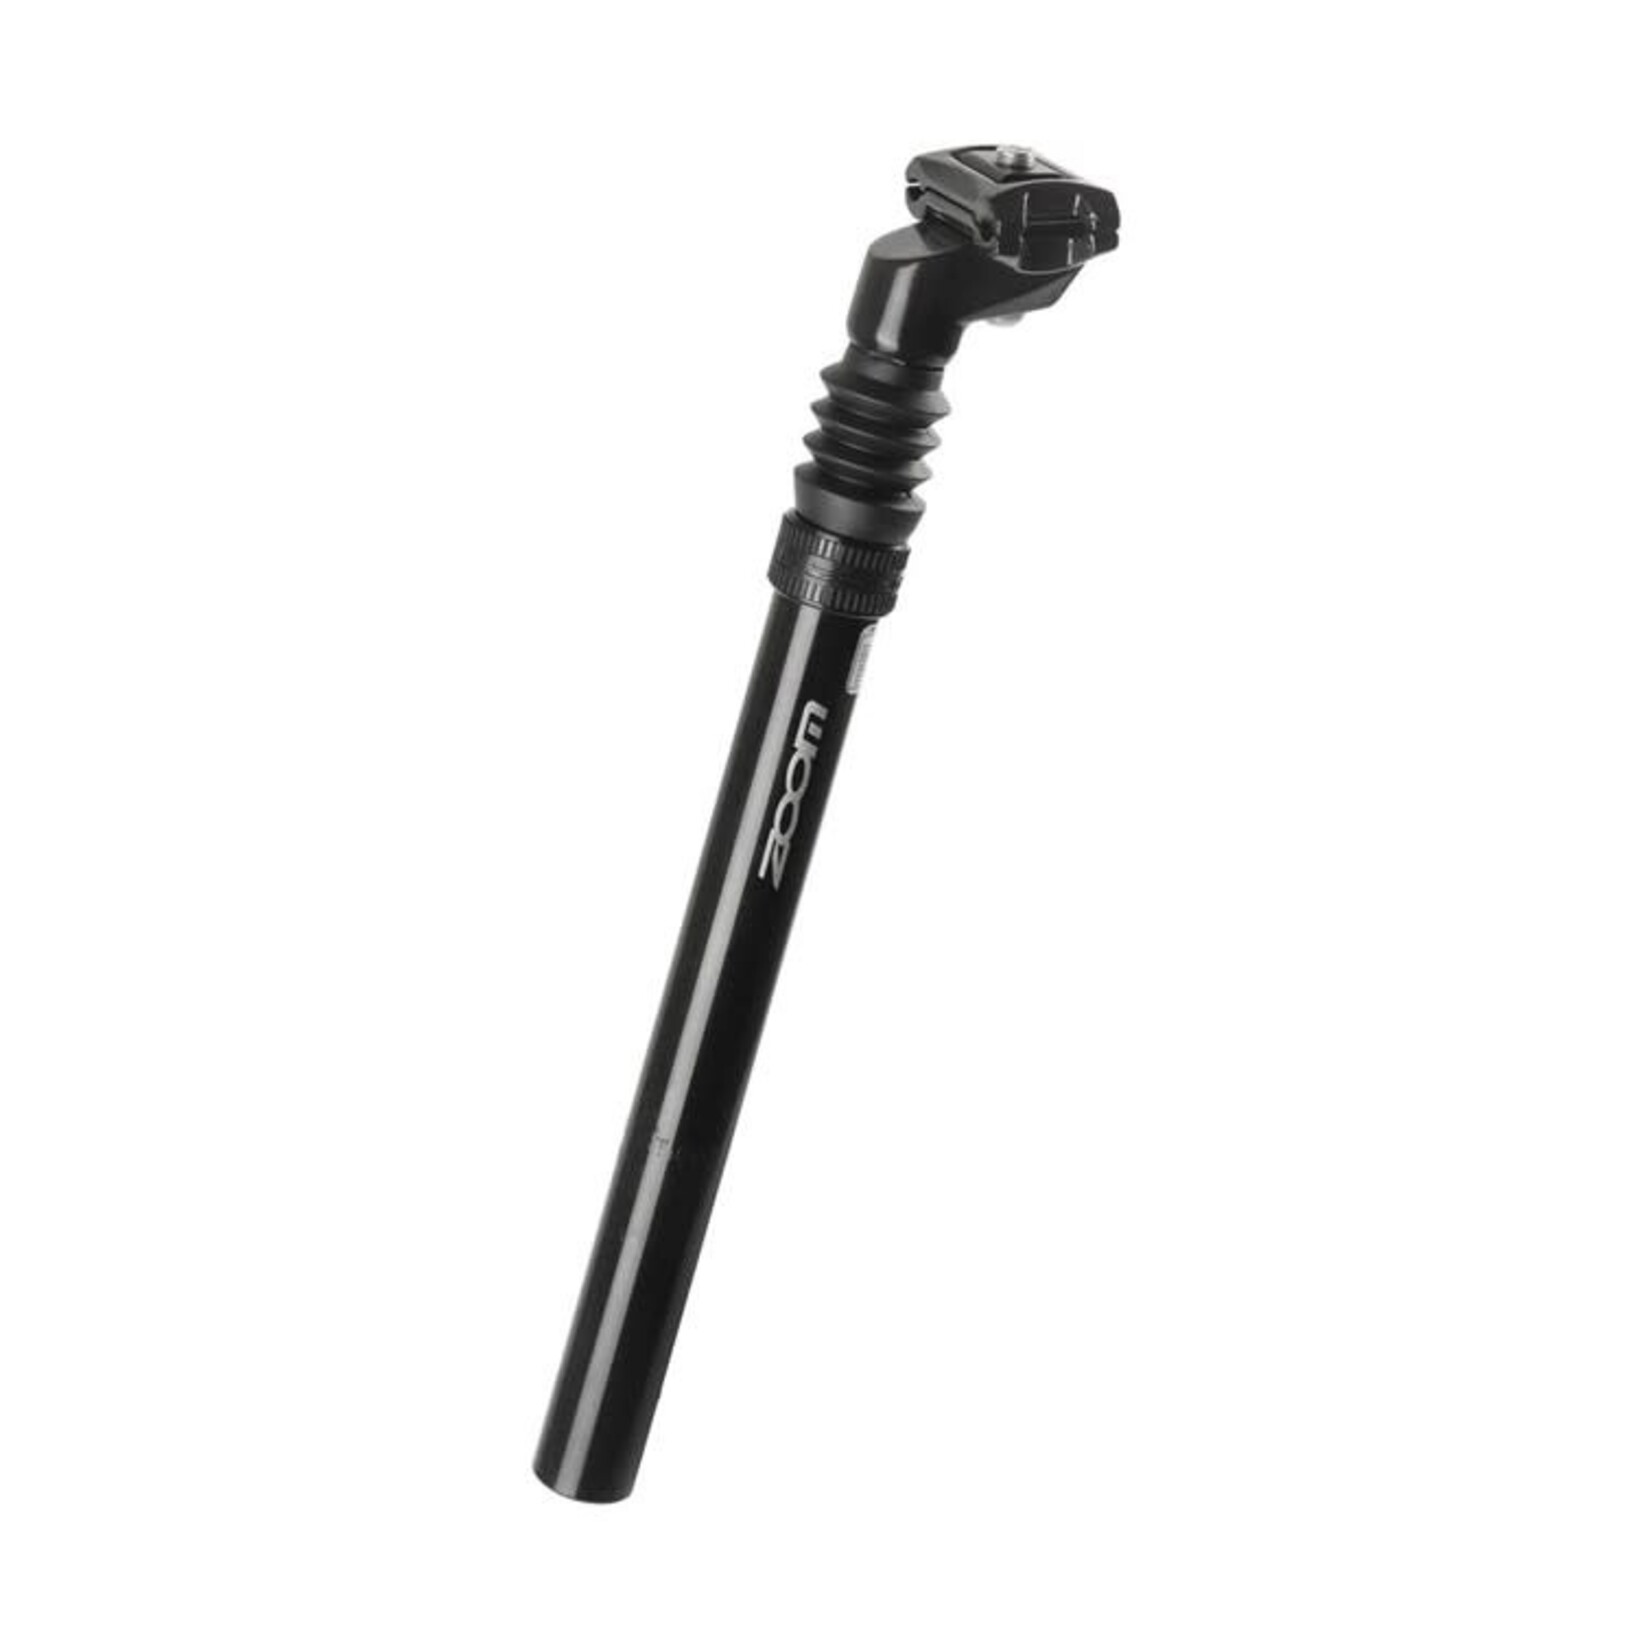 Zoom Zoom Suspension Seat Post Alloy 300mm x 27.2mm Black